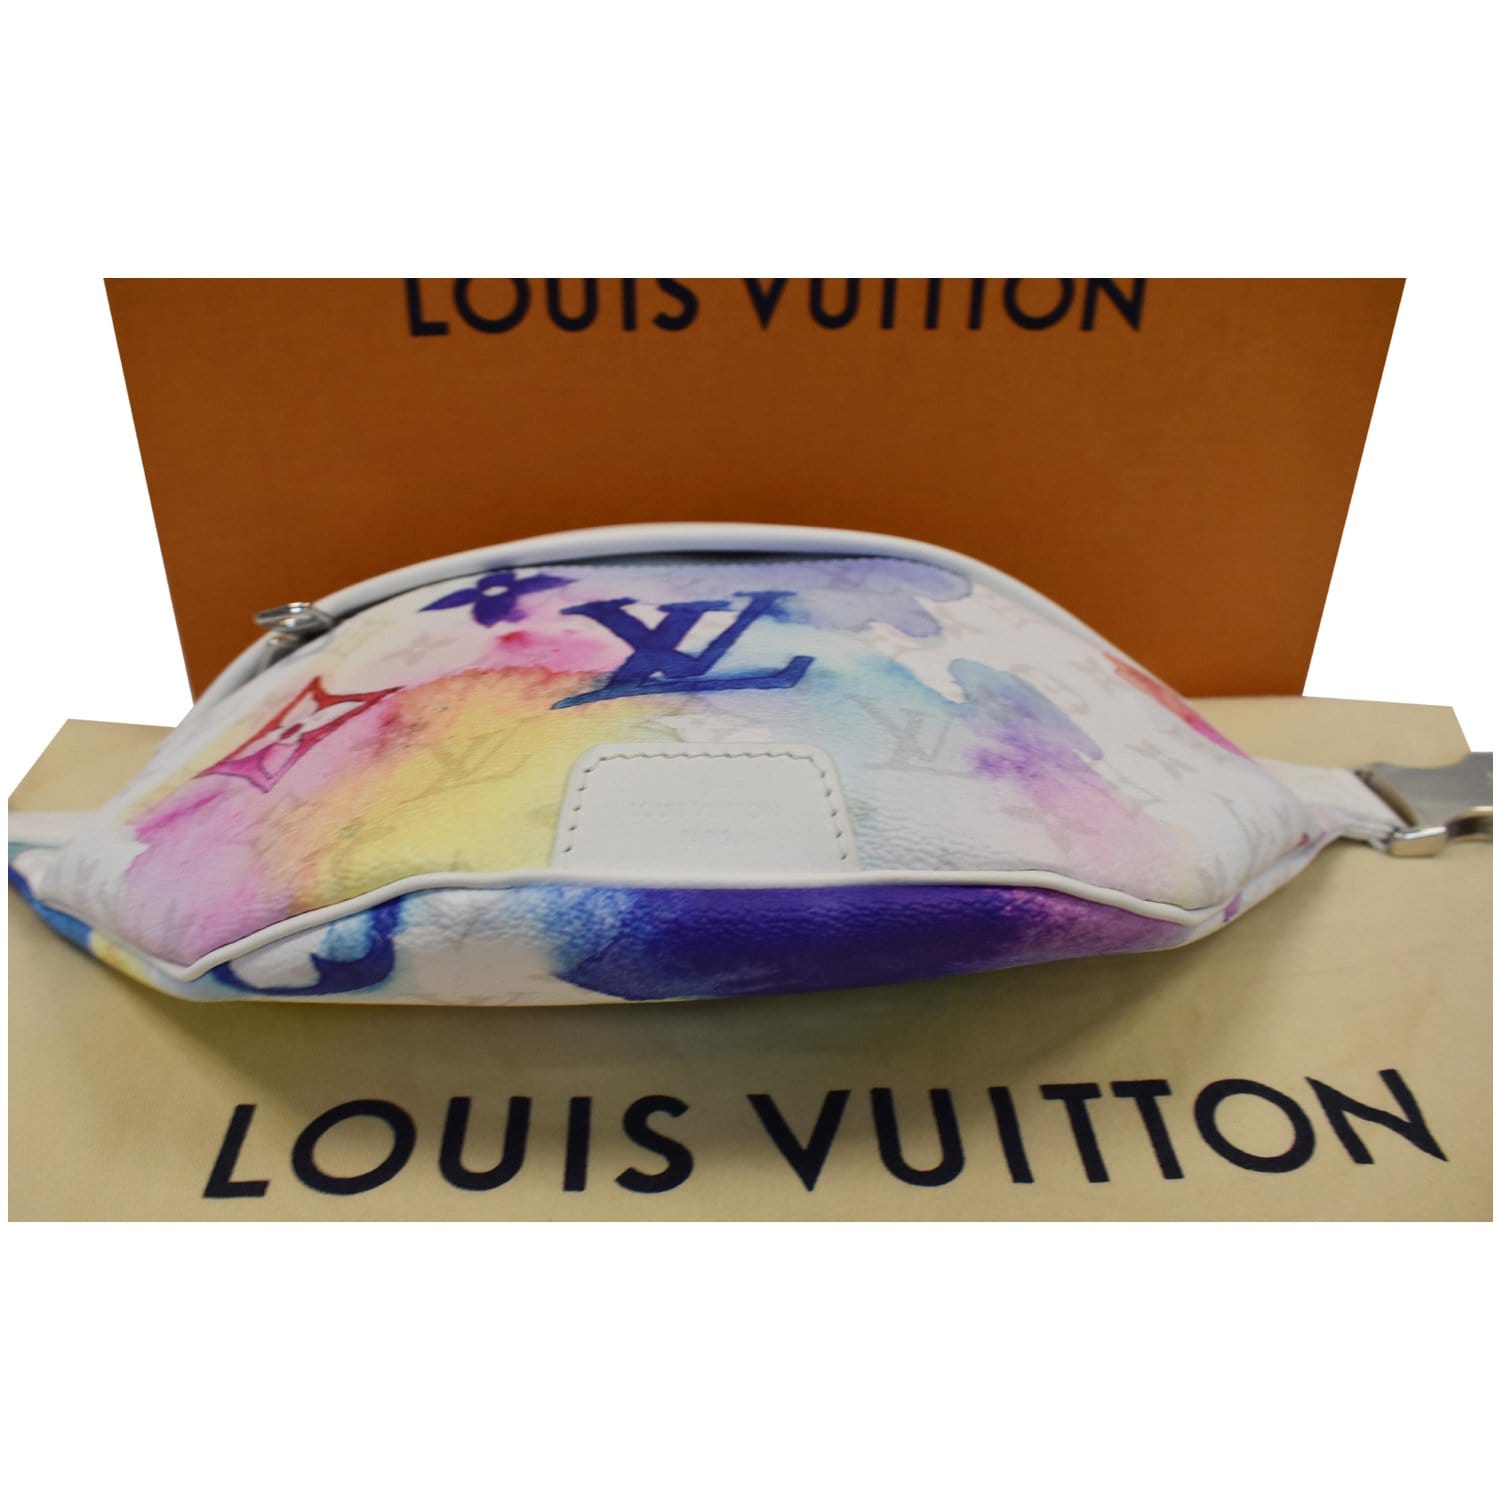 Louis Vuitton M45759 LV Discovery Bumbag PM Bag in Monogram Watercolor Blue  coated canvas Replica sale online ,buy fake bag